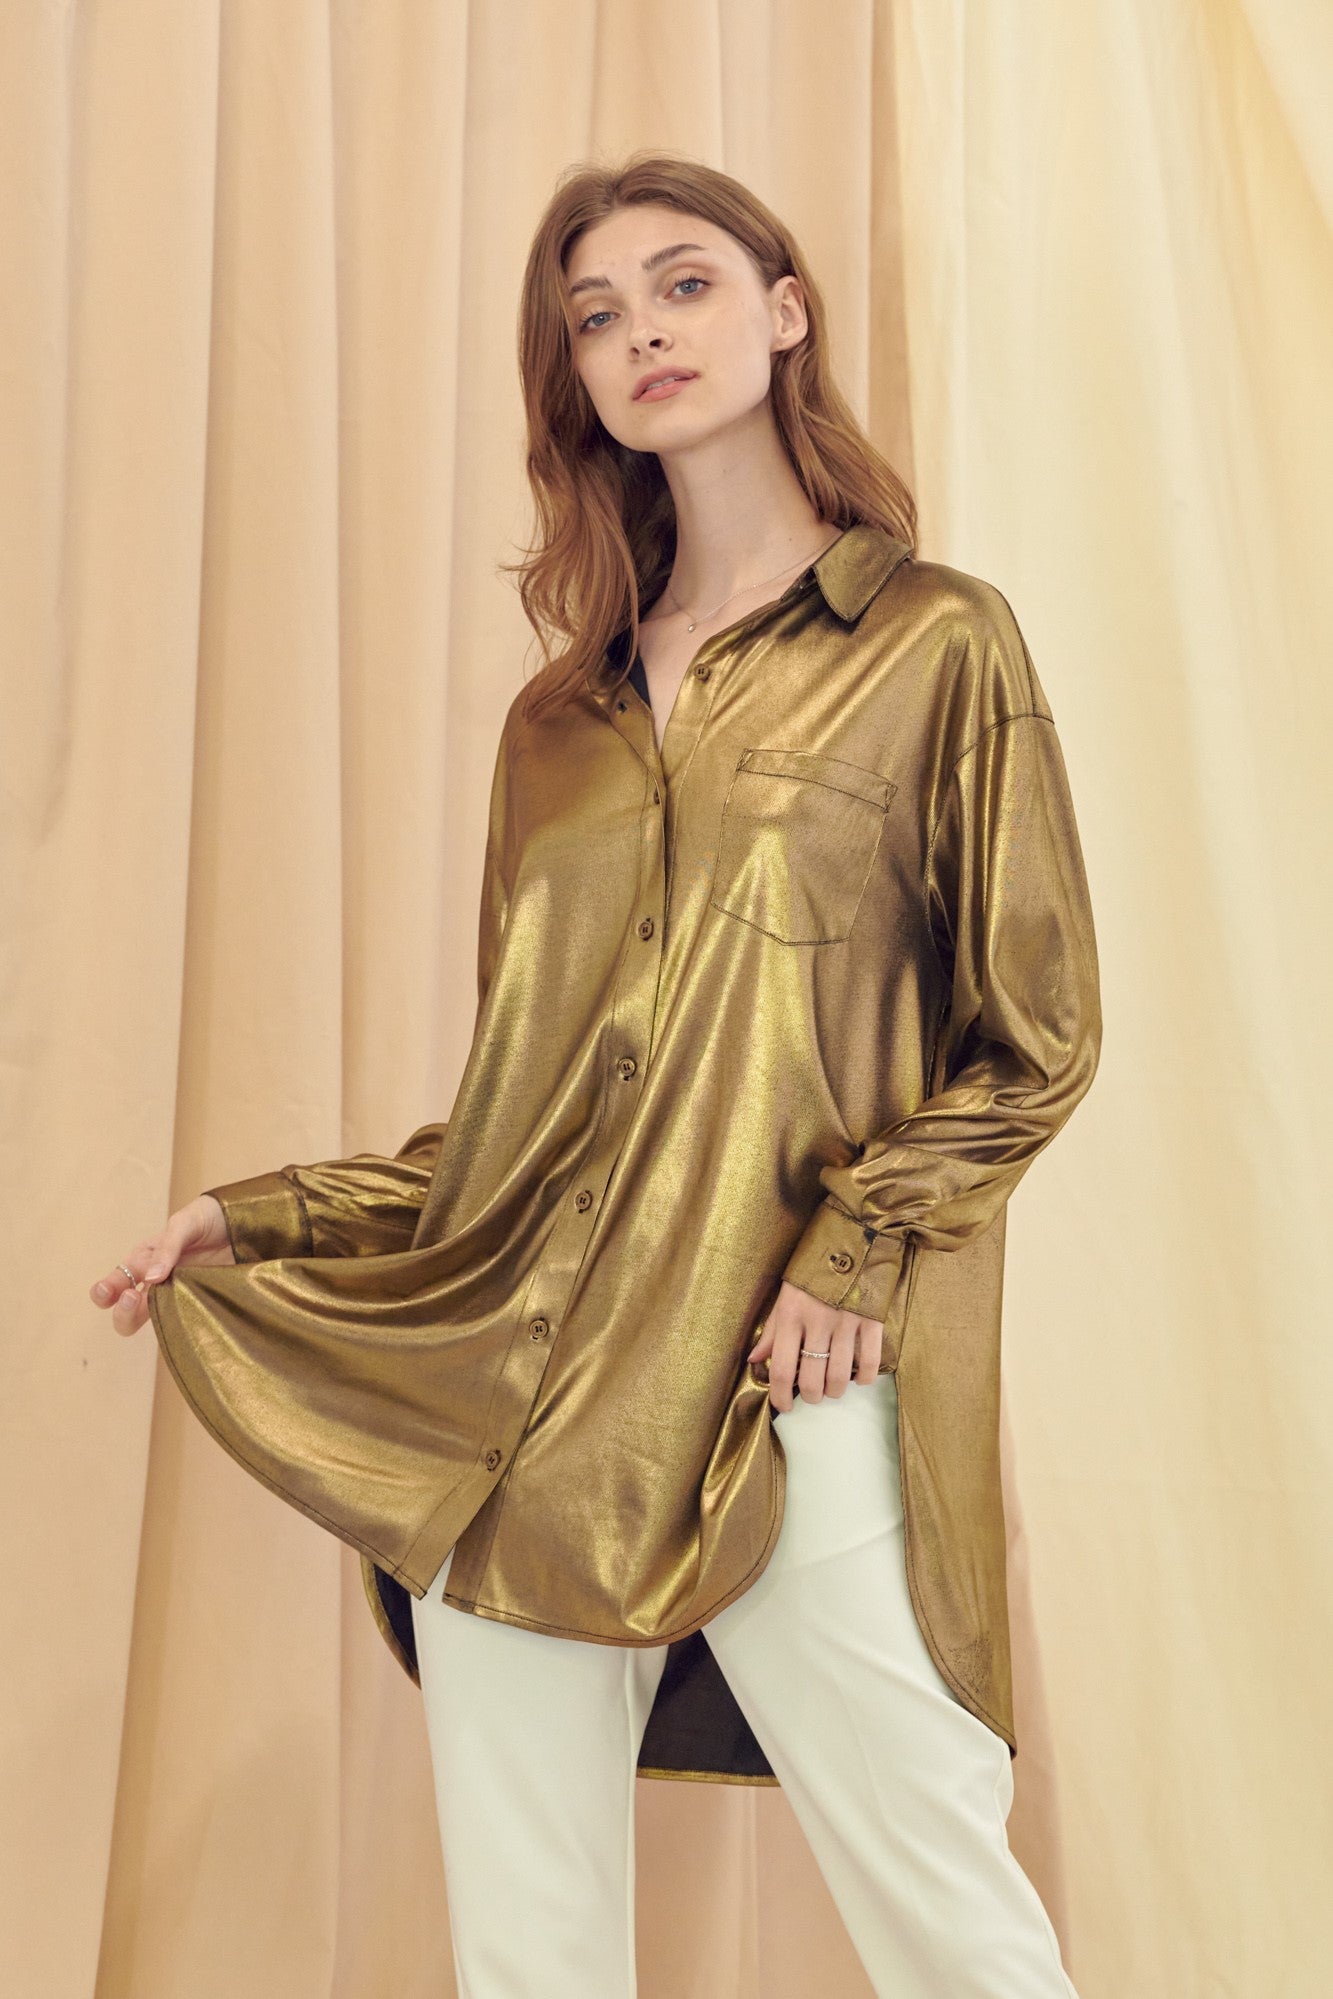 Weezie D. long sleeve Gold Metallic Button Up Stretch Top with front pocket is chic. Wear with denim, pants or even a skirt. We love the stretch metallic fabric for a flowy silhouette. Tuck blouse in or out for a relaxed look. Feels like luxury on your skin. Wear any time of year. Thigh Length 95% Polyester 5% Spandex